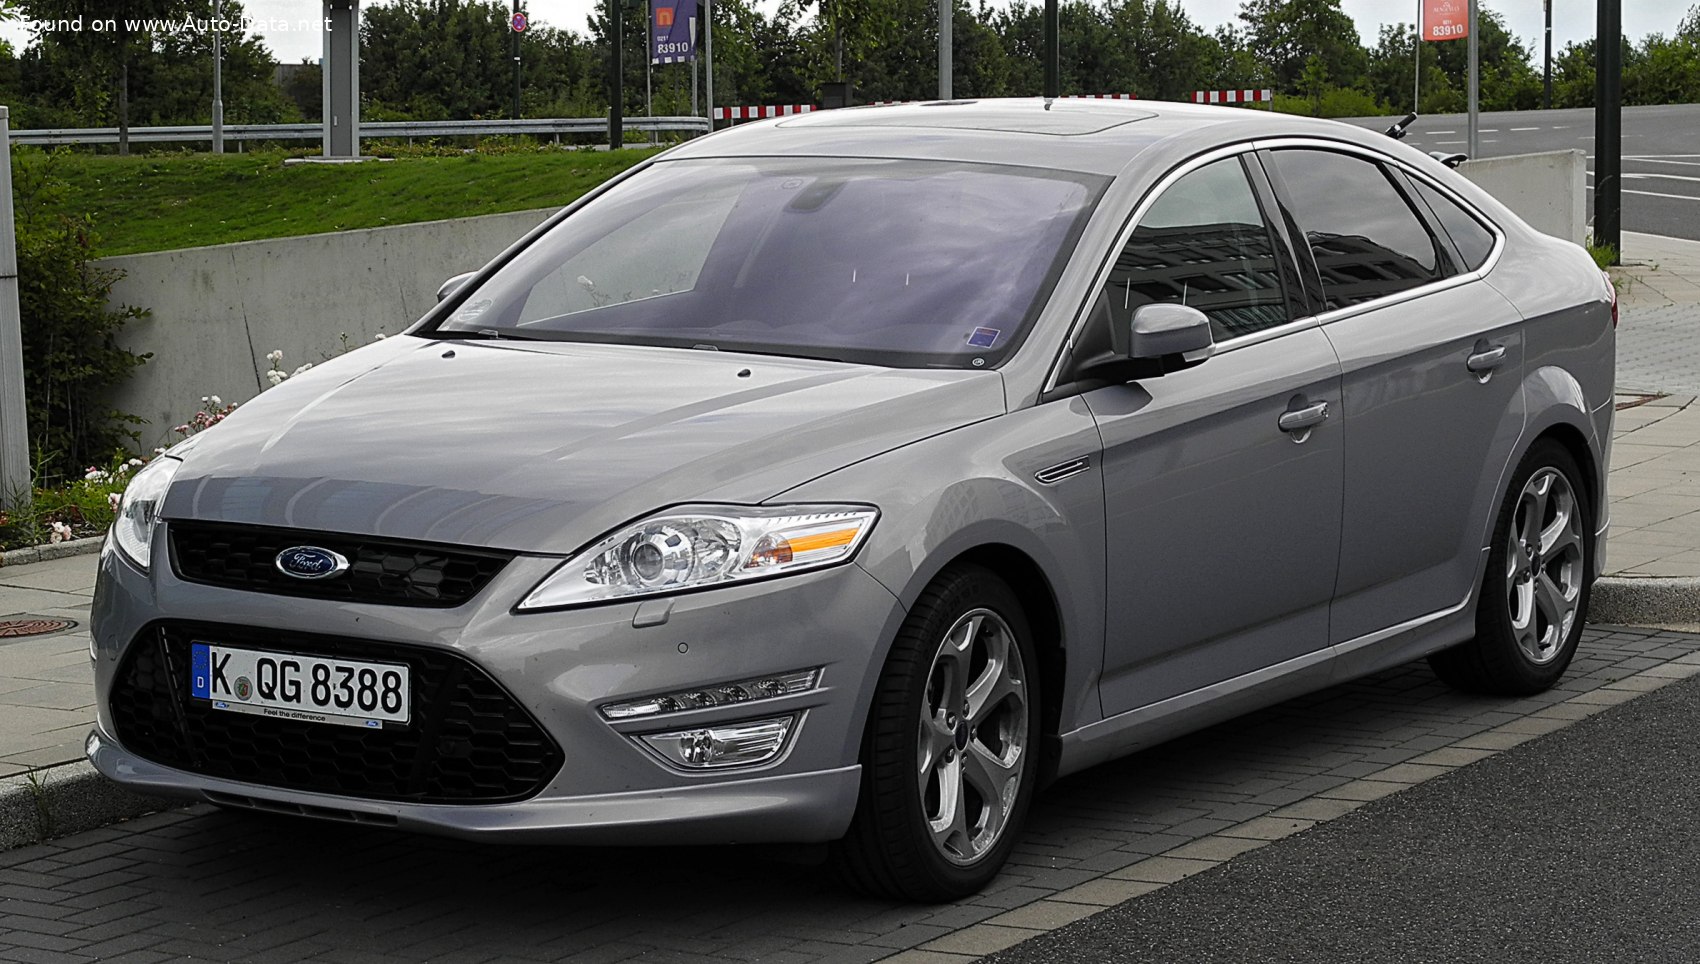 Ford Mondeo III Hatchback (facelift 2010) 1.6 Duratorq TDCi Hp) ECOnetic | Technical specs, data, fuel consumption,